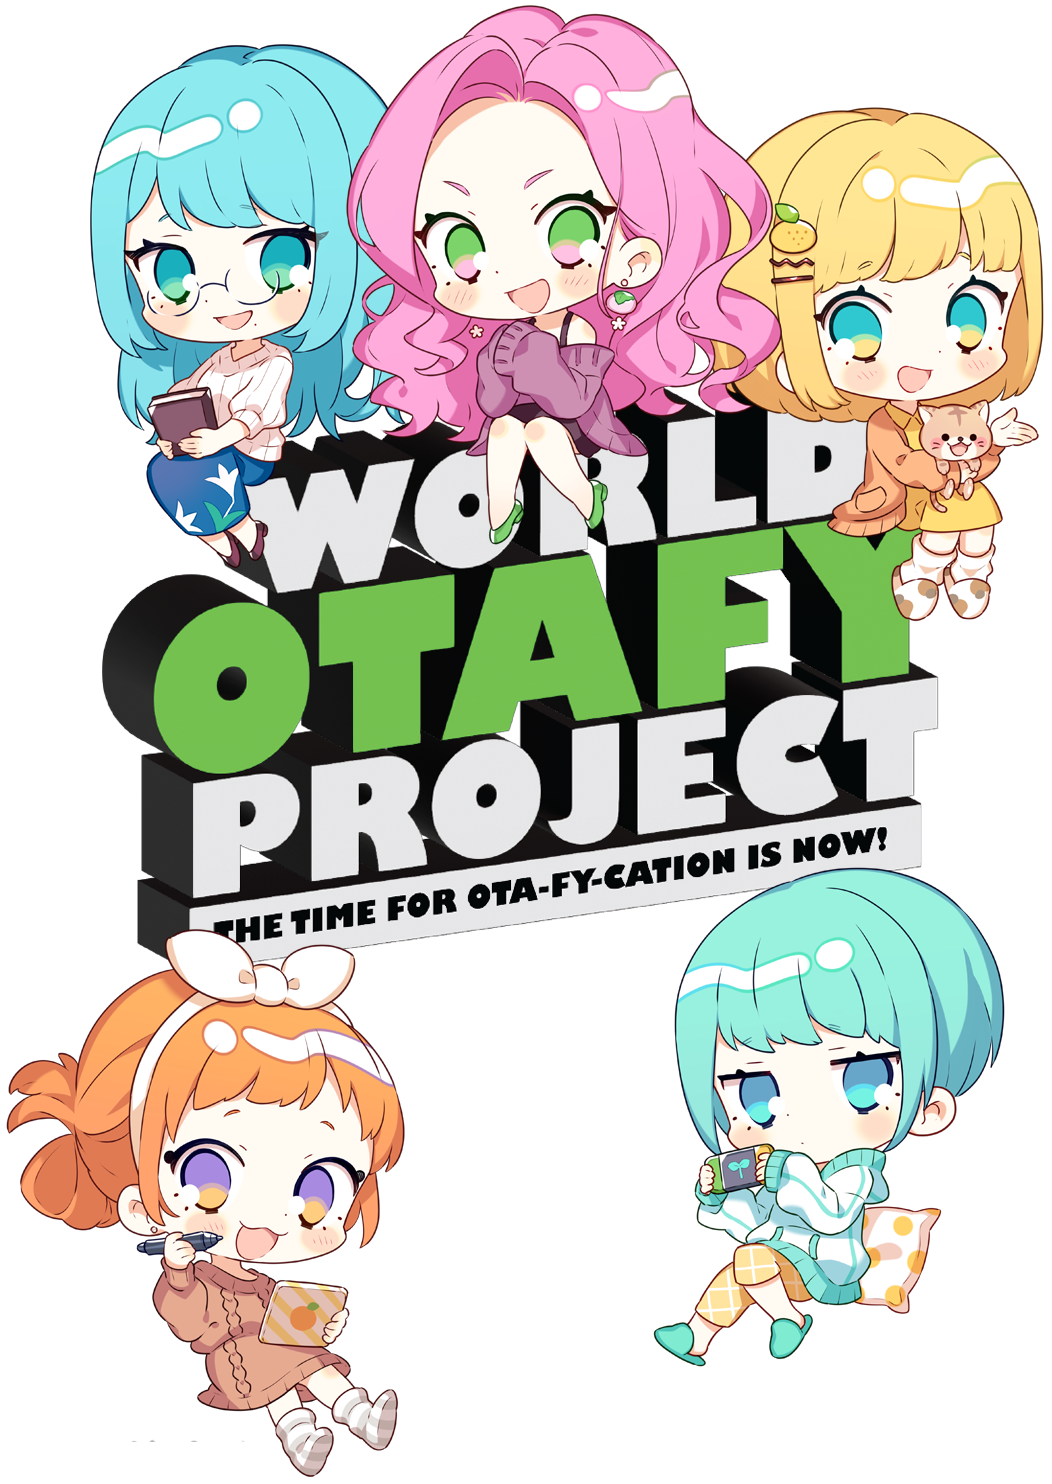 WORLD OTAFY PROJECT - THE TIME FOR OTA-FY-CATION IS NOW!